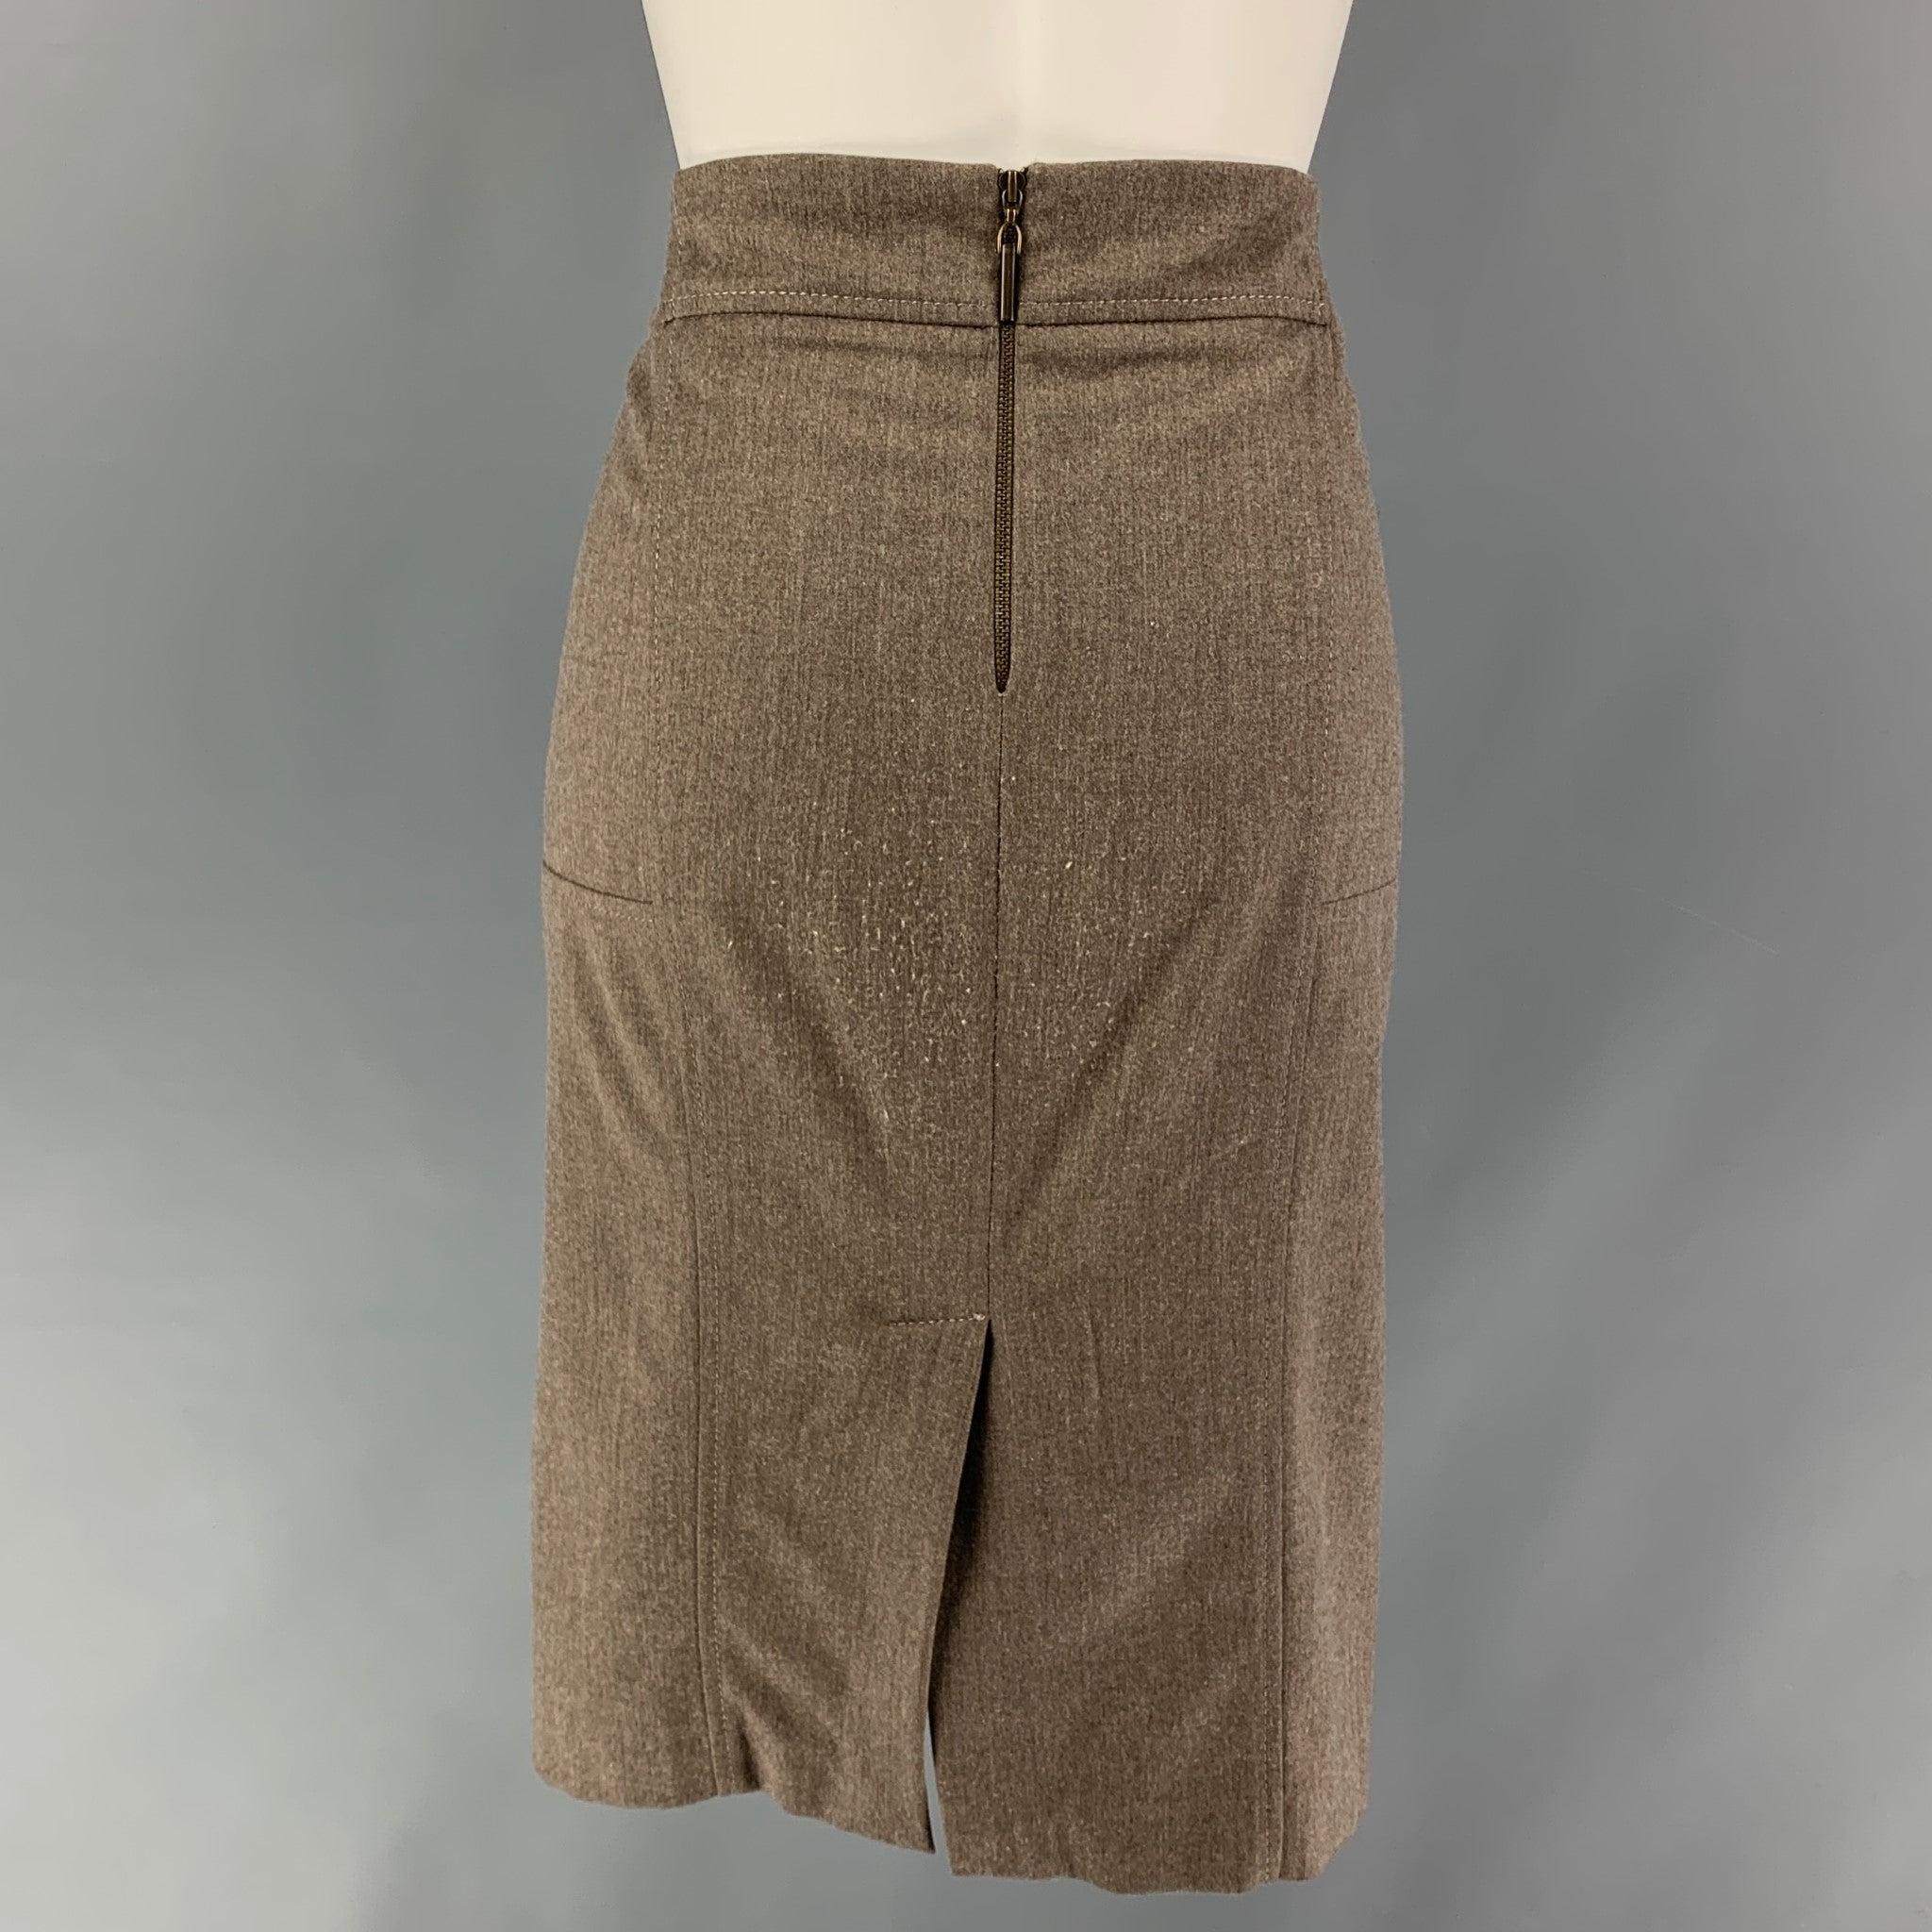 BRUNELLO CUCINELLI Size 8 Brown Wool Blend Heather Pencil Skirt In Good Condition For Sale In San Francisco, CA